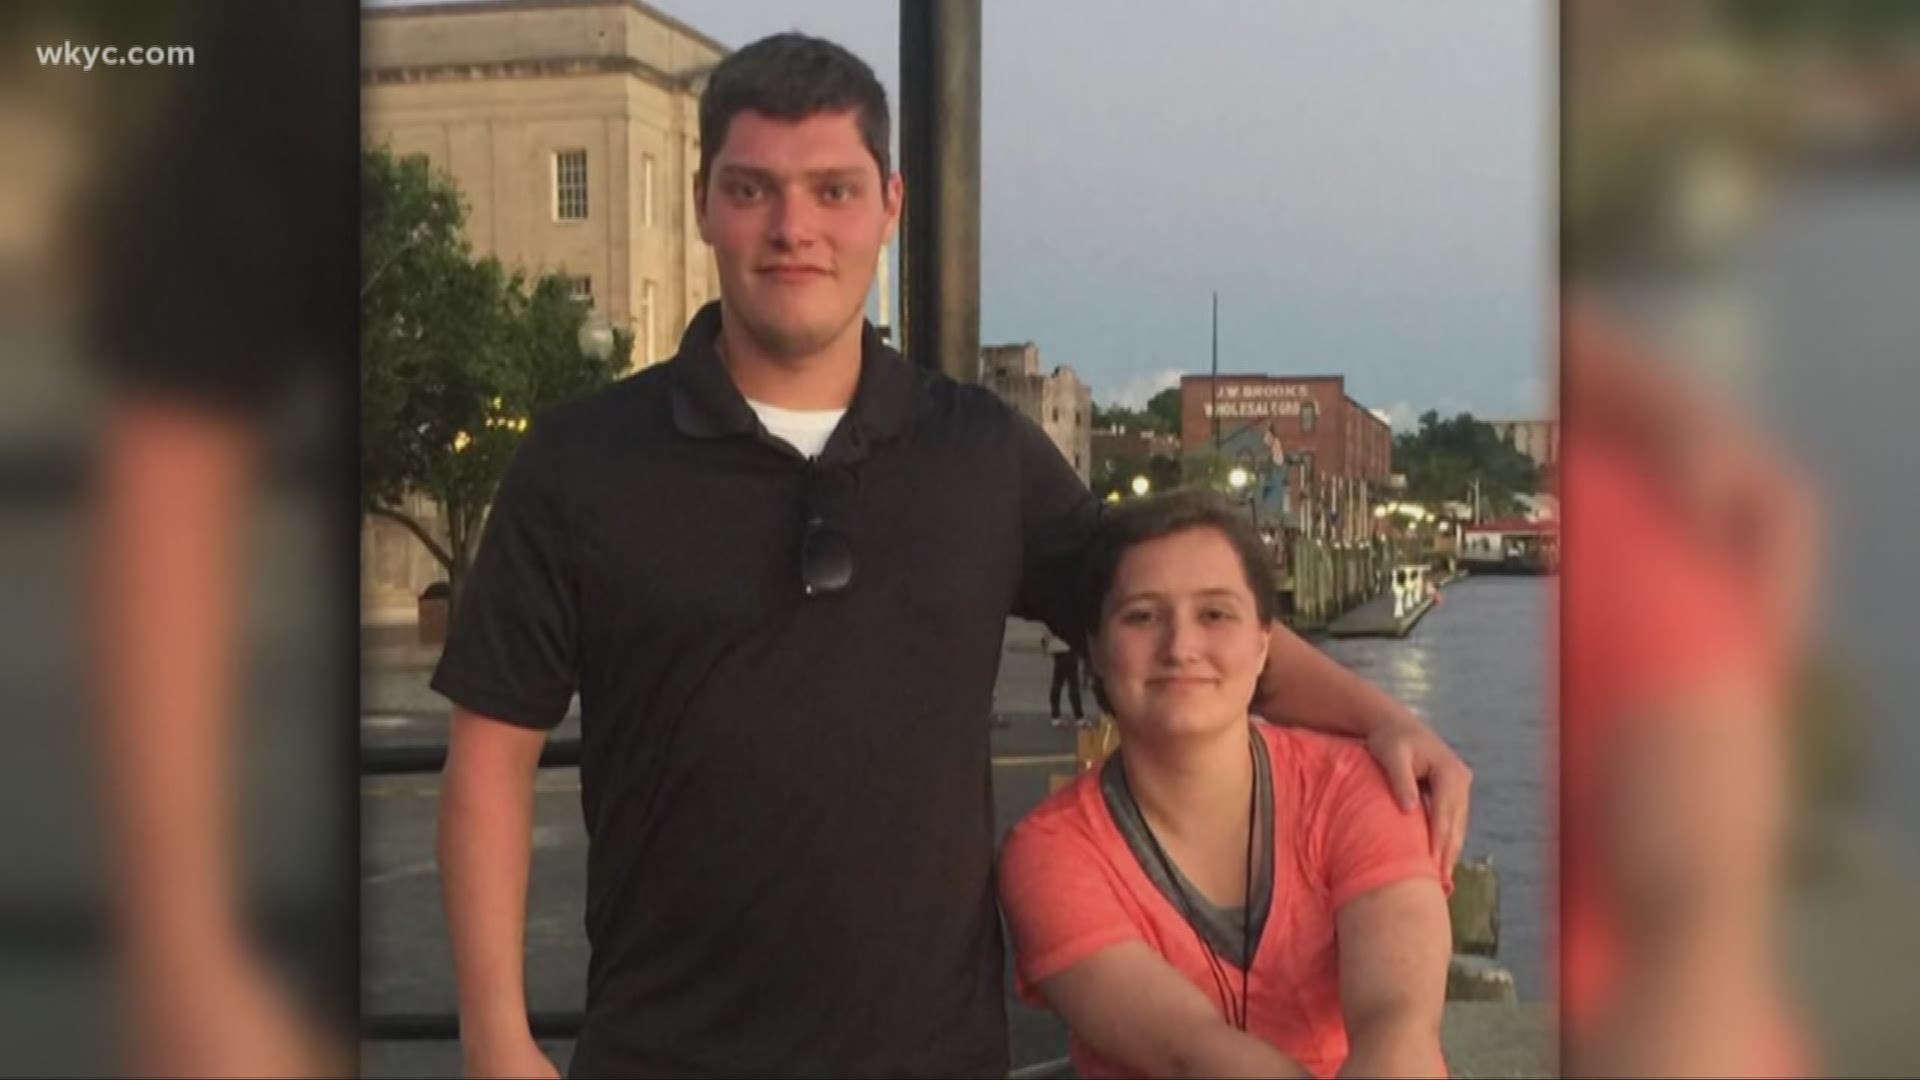 Investigators are split on whether the Dayton shooter intentionally killed his sister, who was one of the first nine he killed, the city's police chief said Tuesday.